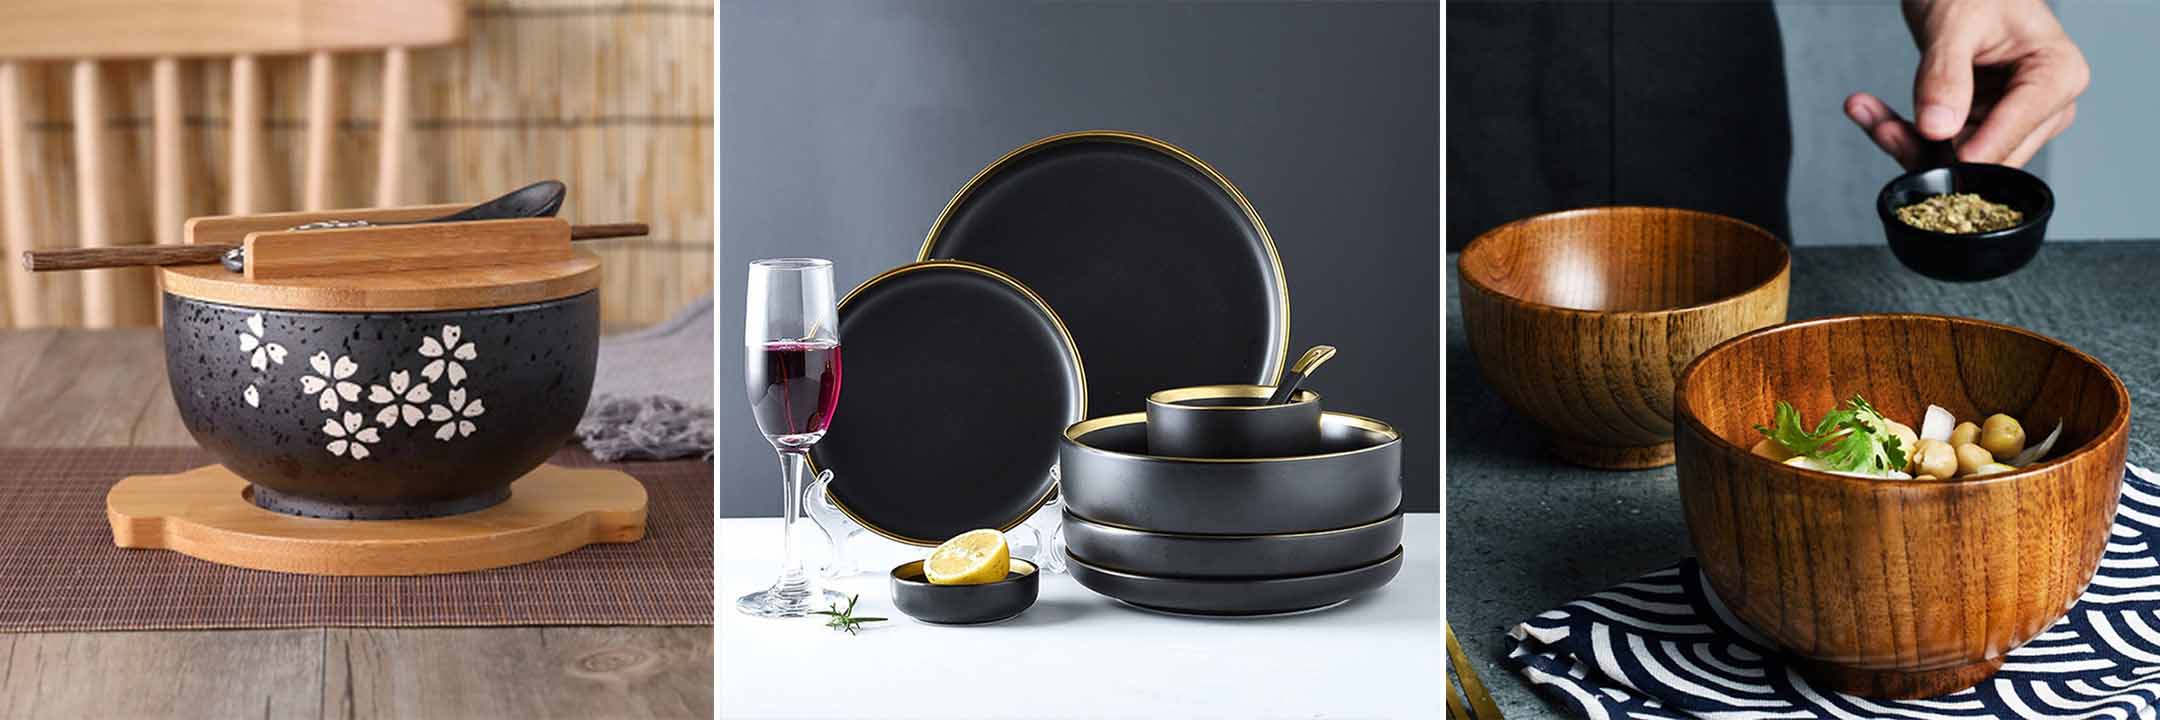 Ceramic black dinner plates and wooden bowls